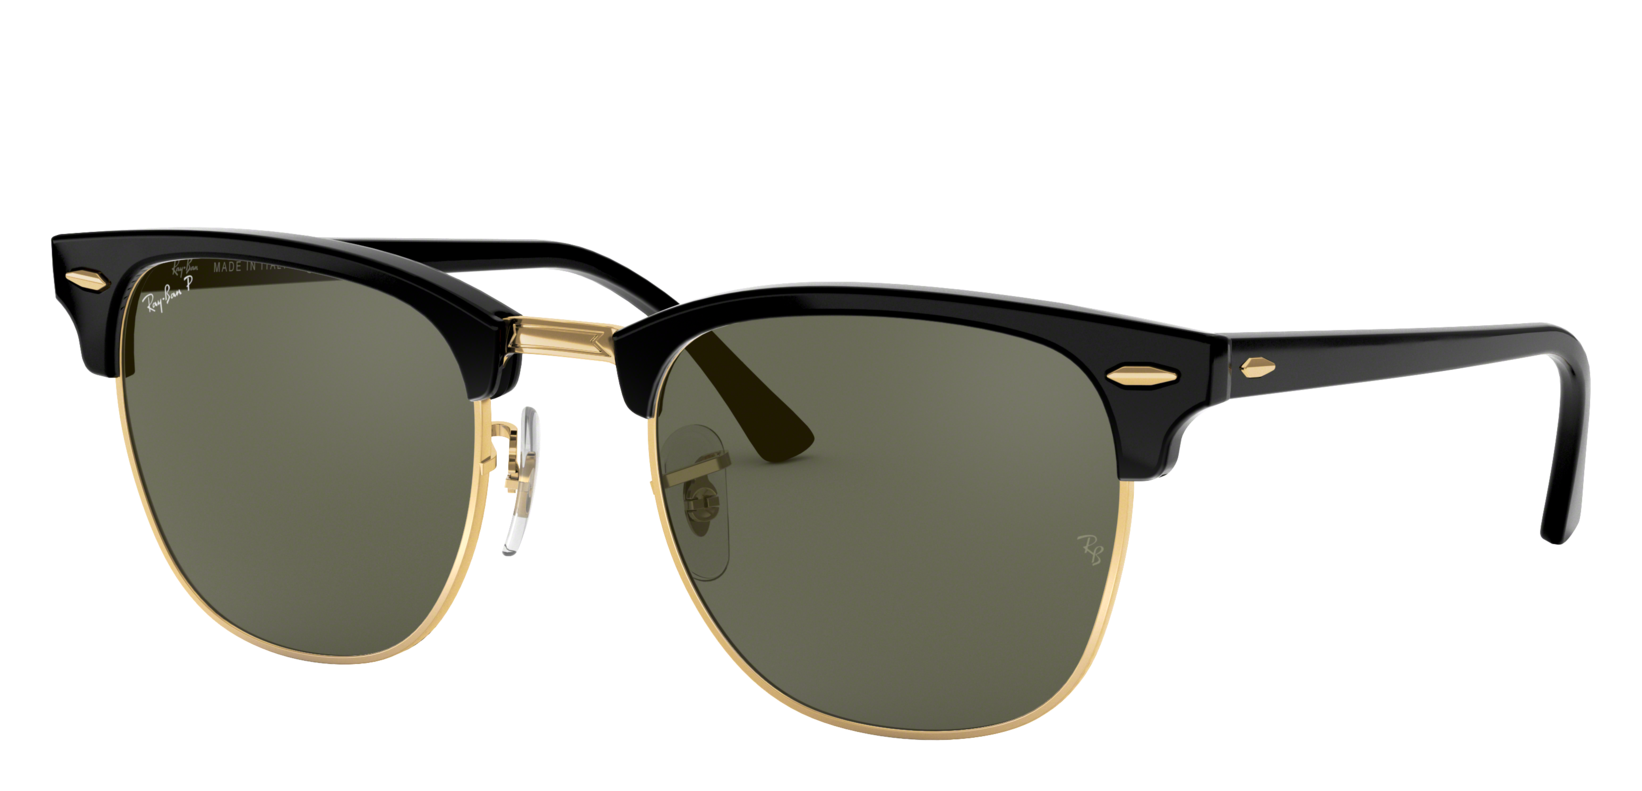 Ray-Ban Clubmaster Classic RB3016 Glass Polarized Sunglasses | Bass Pro ...